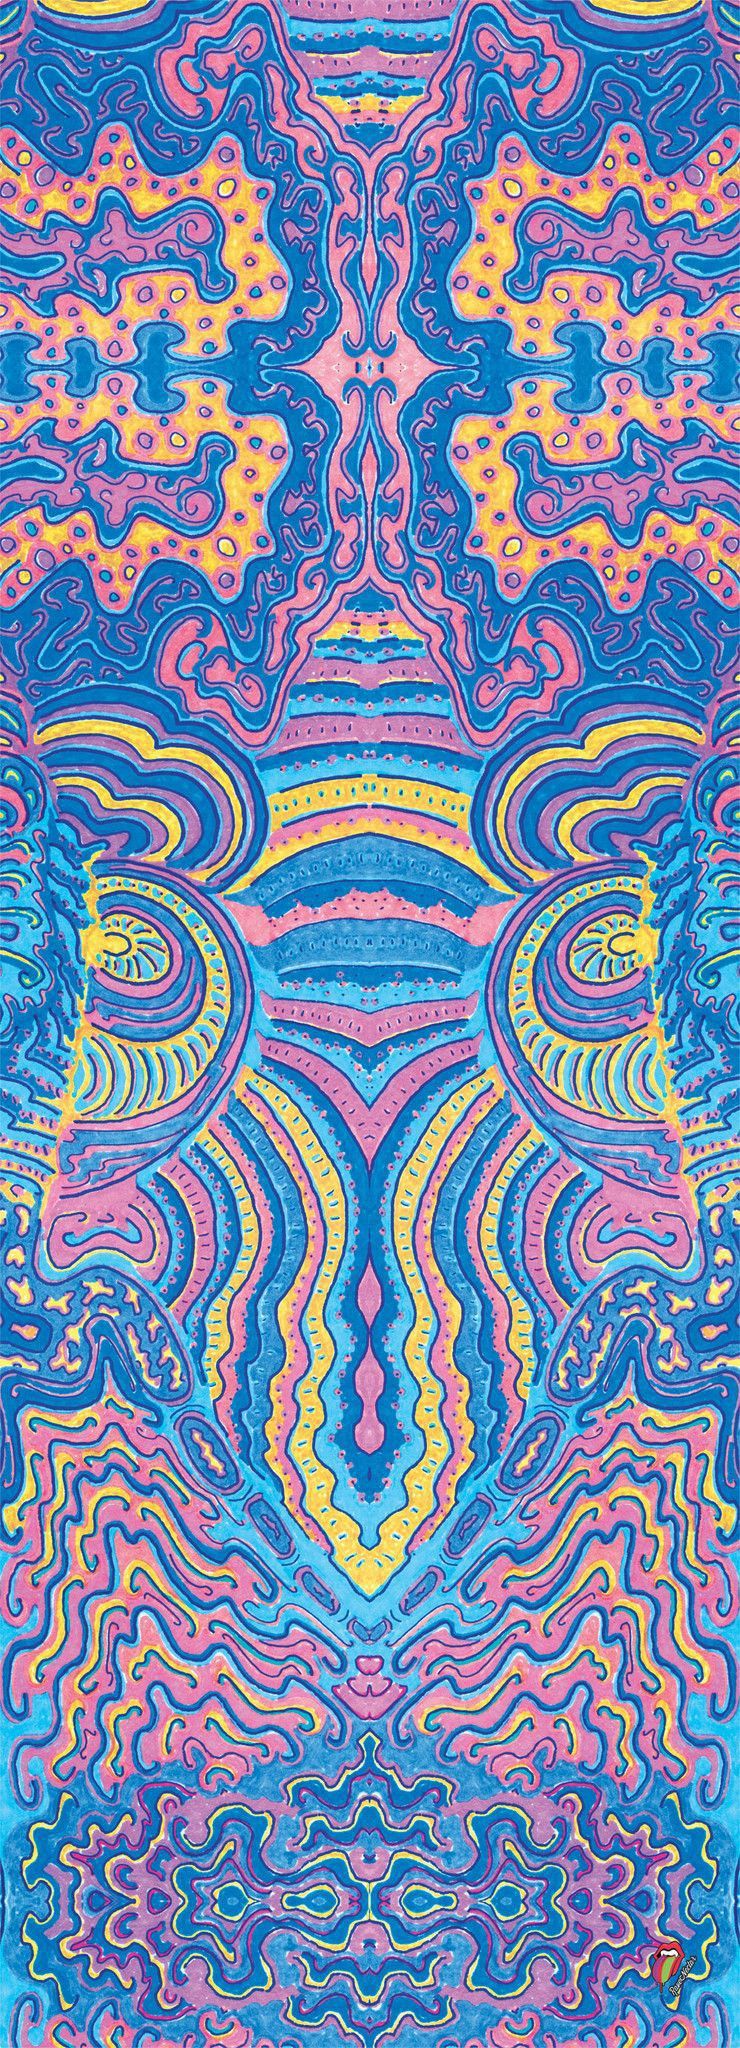 A psychedelic abstract art print - Kidcore